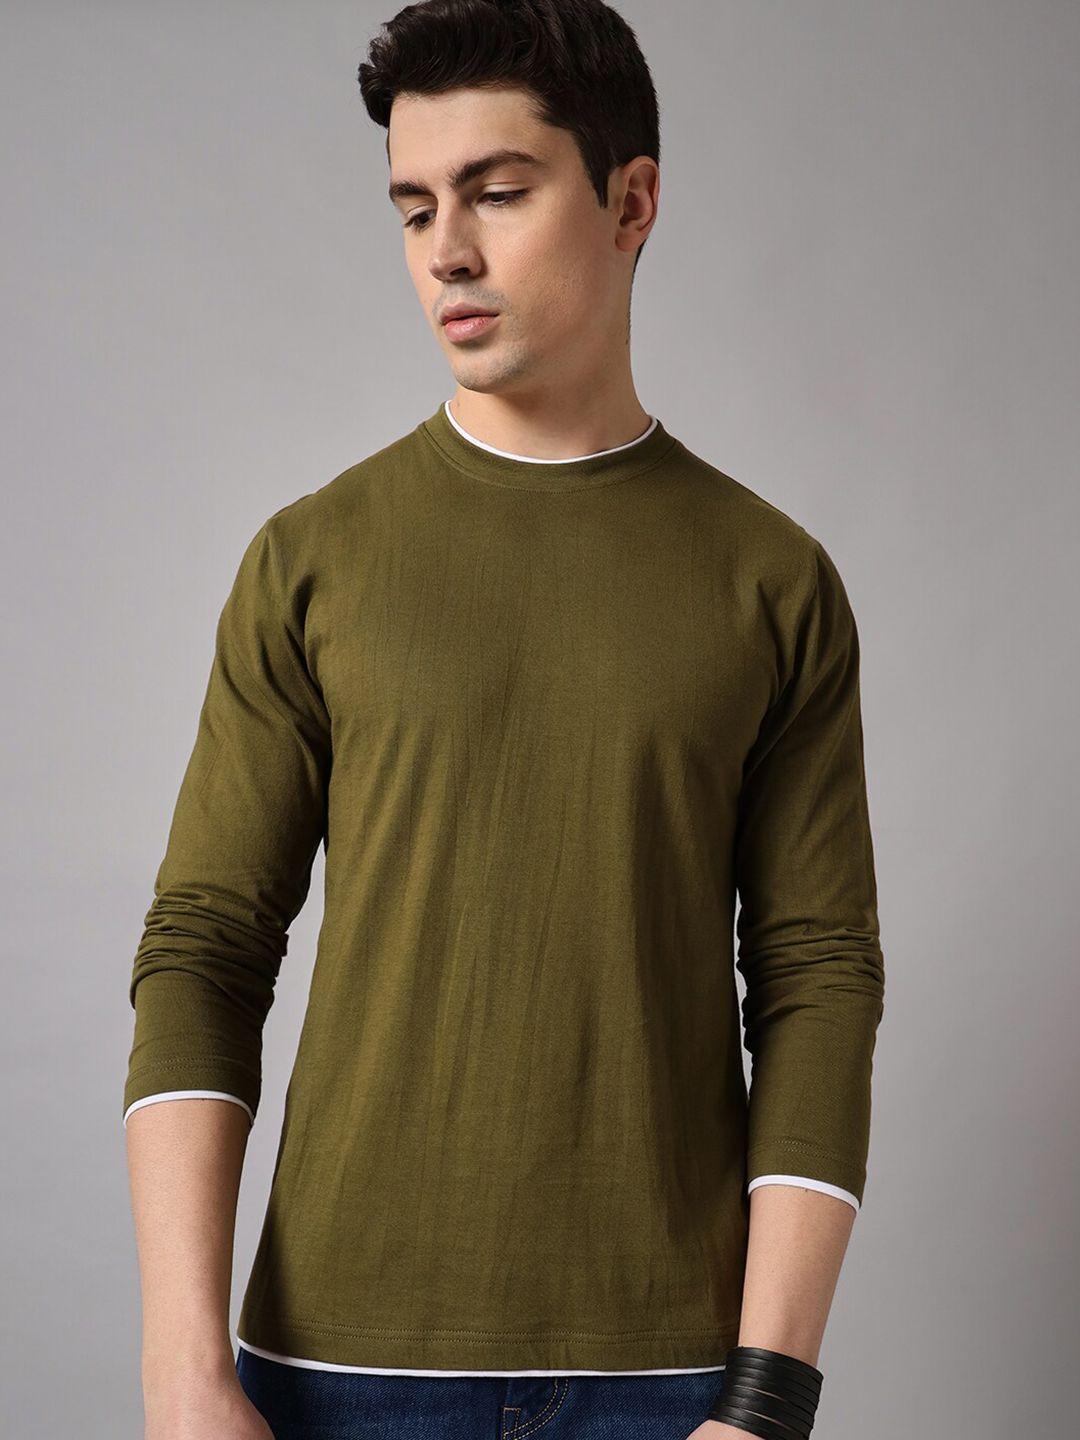 the dry state round neck cotton t-shirt